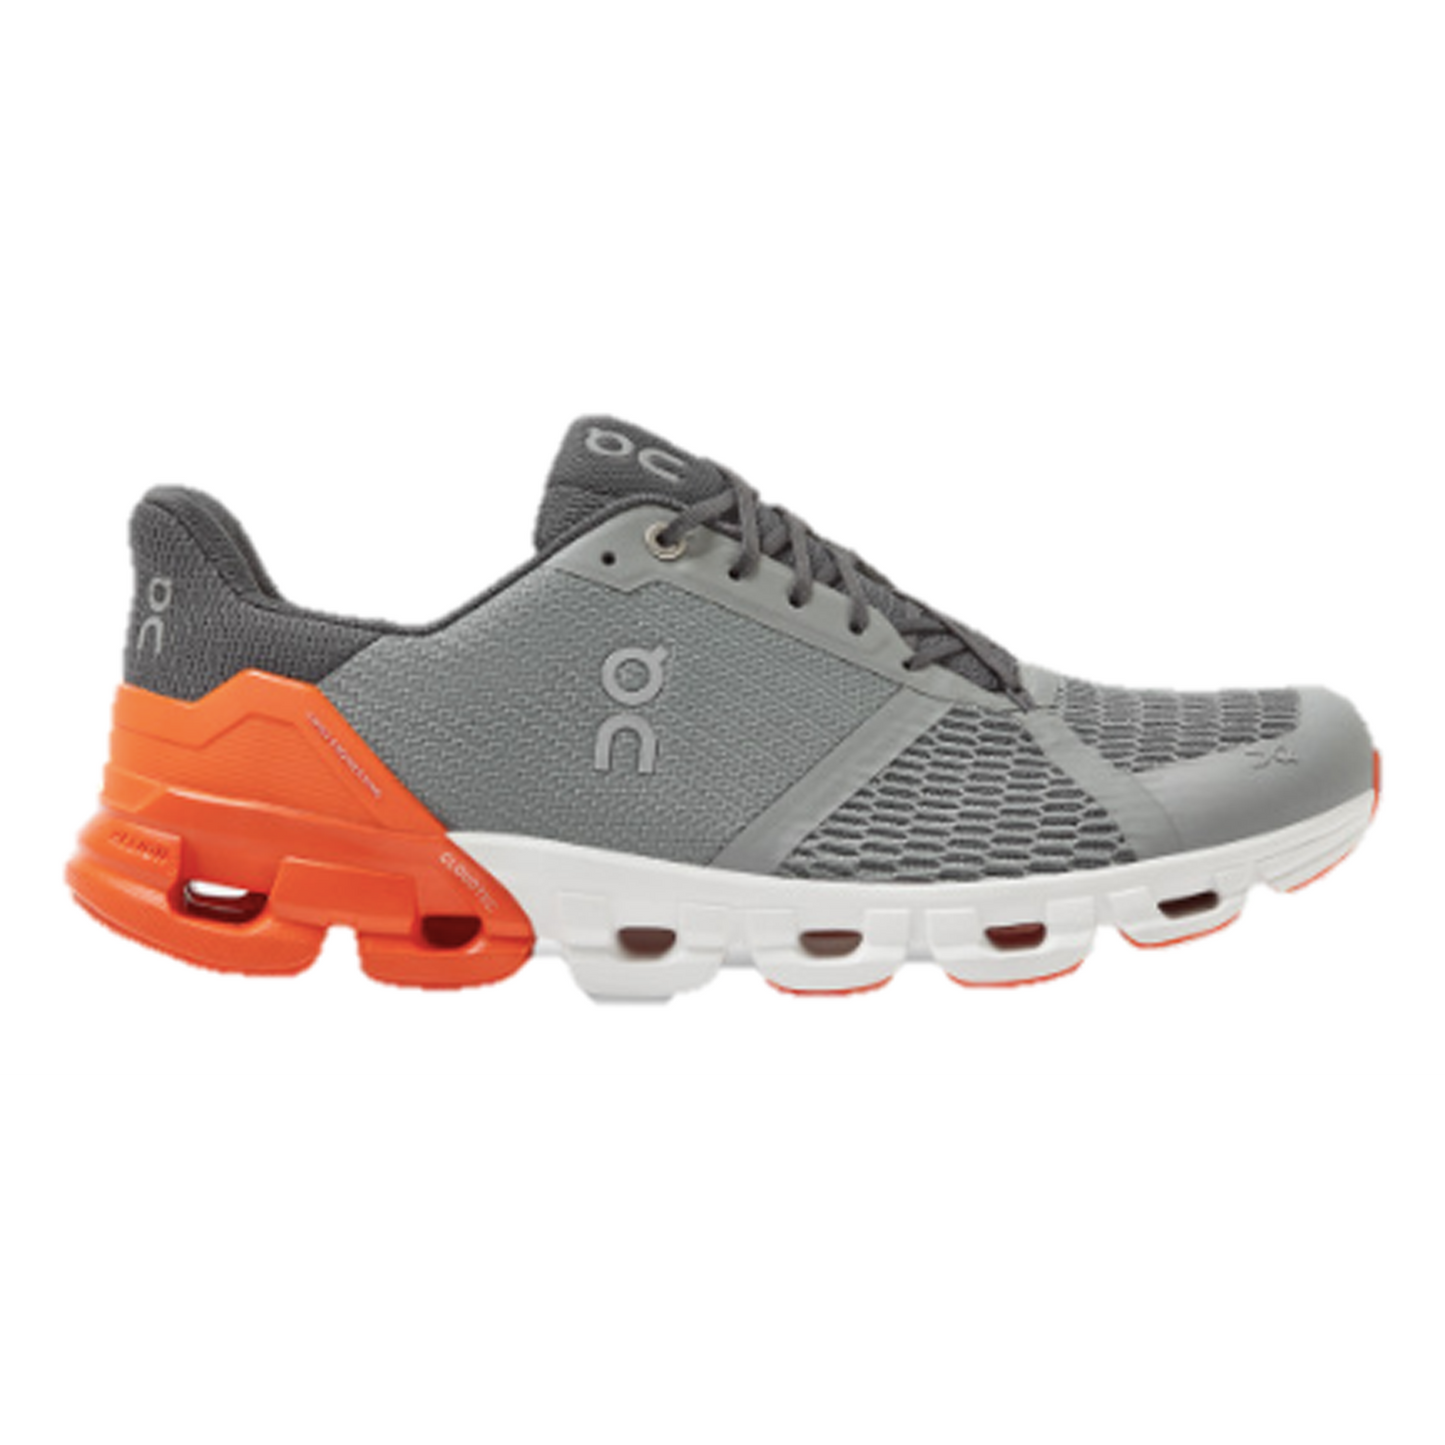 Men's ON Cloudflyer running shoe in colours grey and orange.